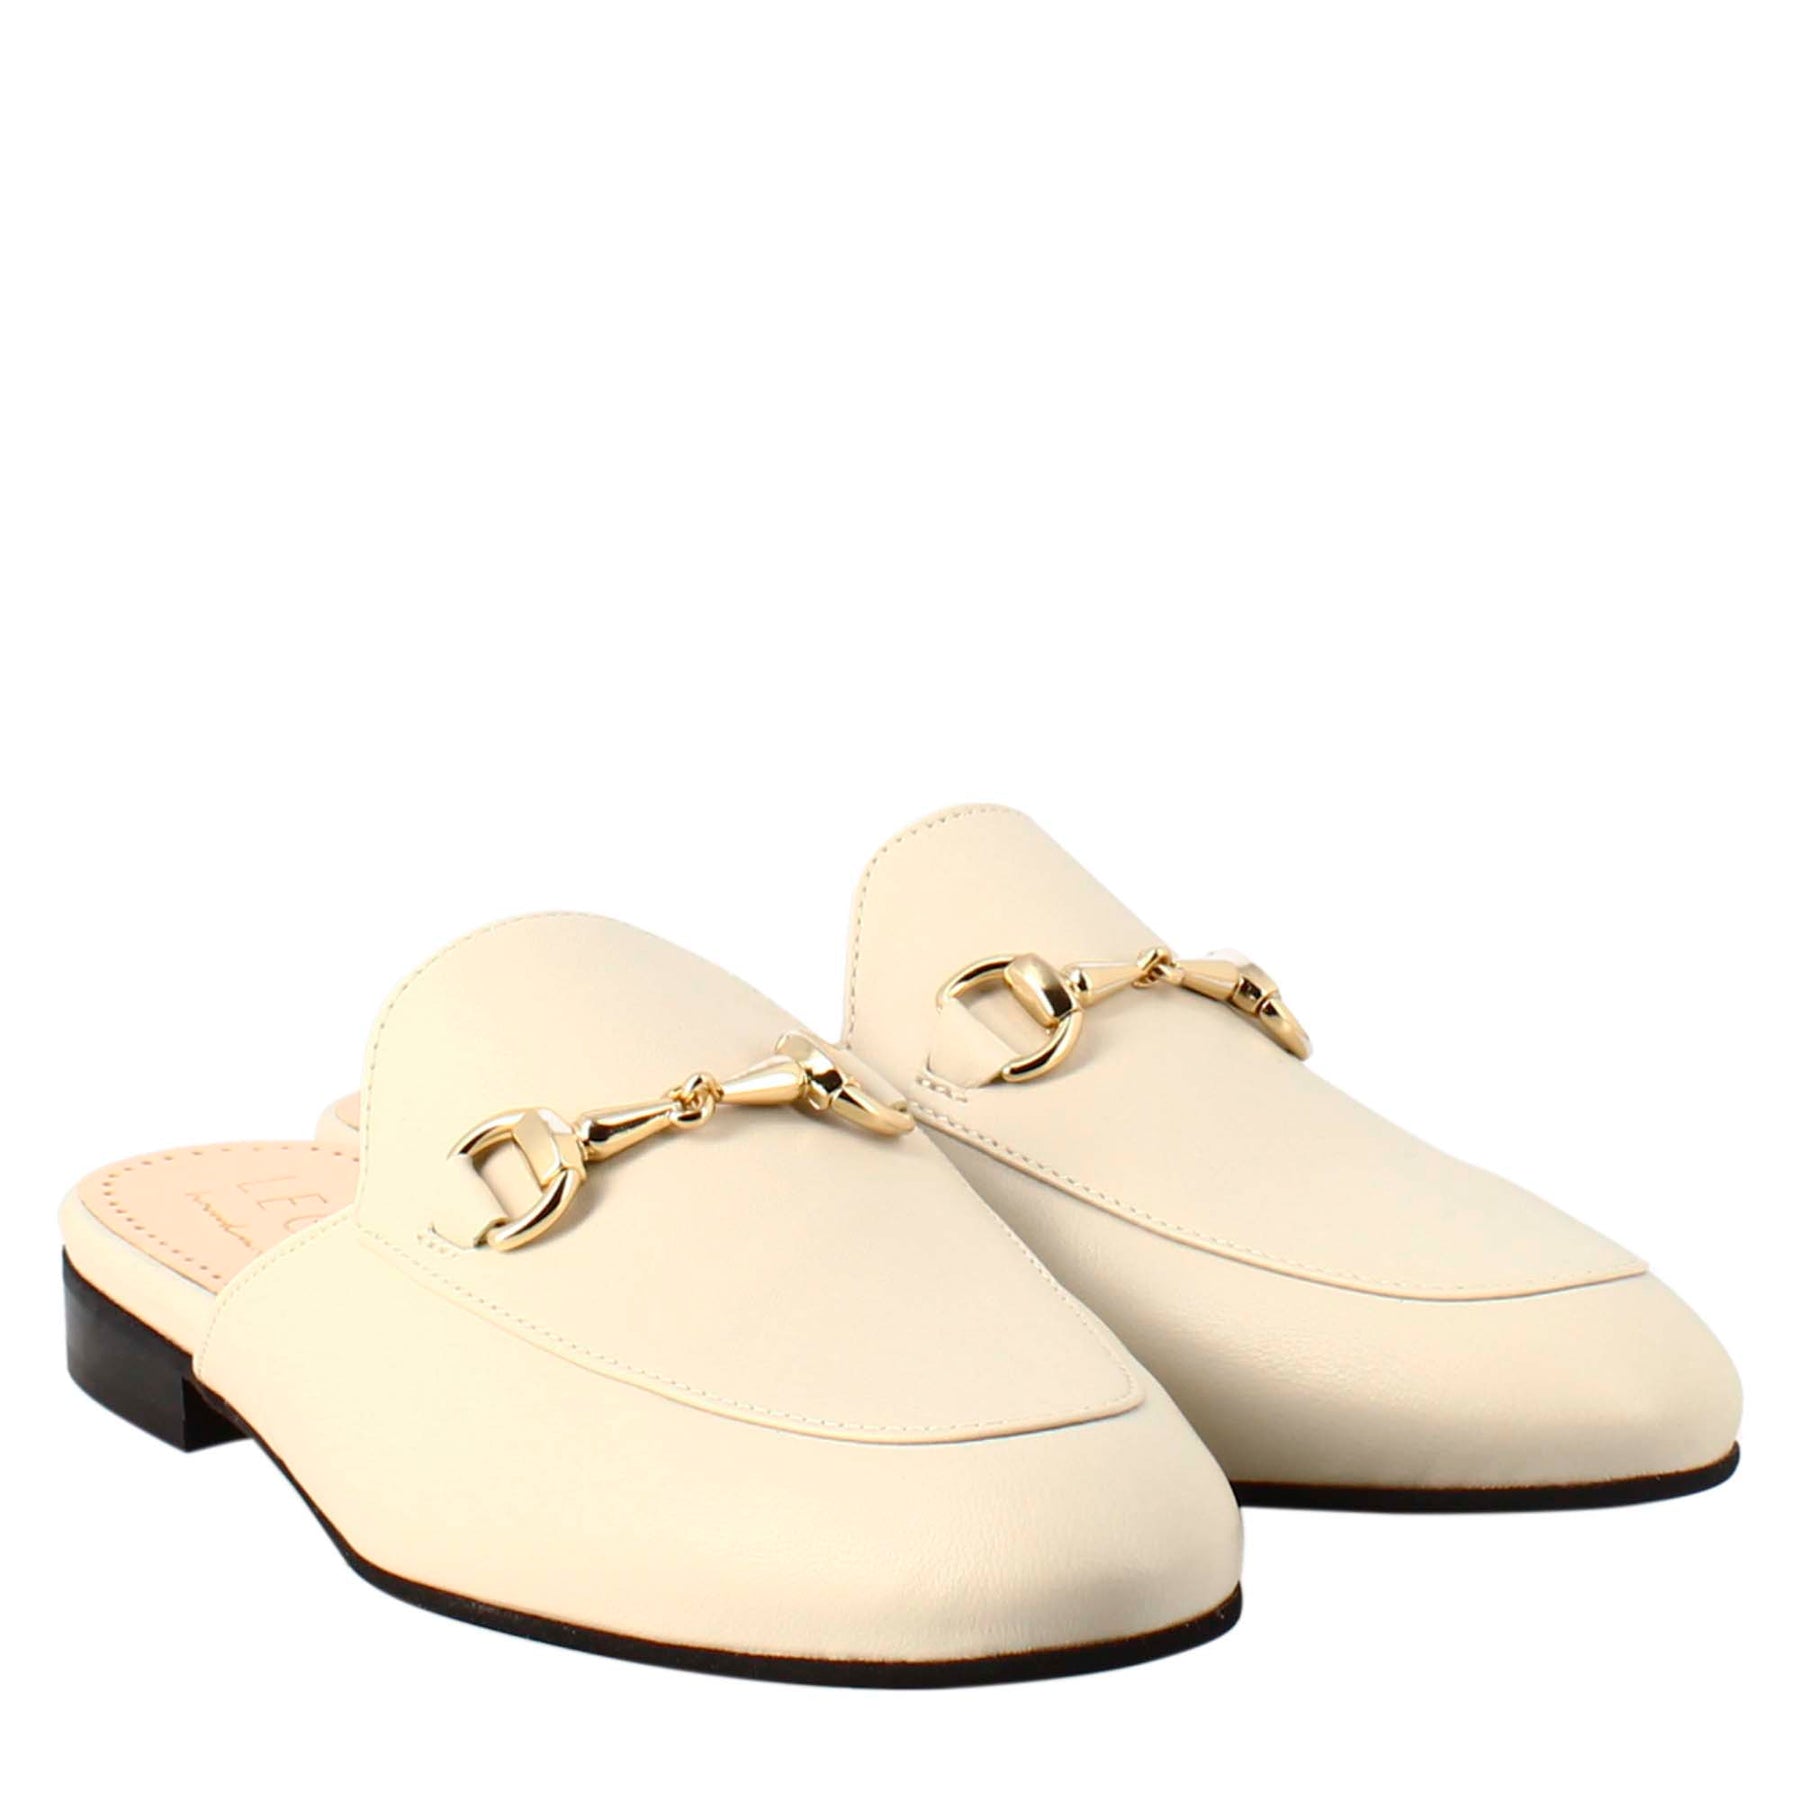 White sabot with golden buckle and real leather sole